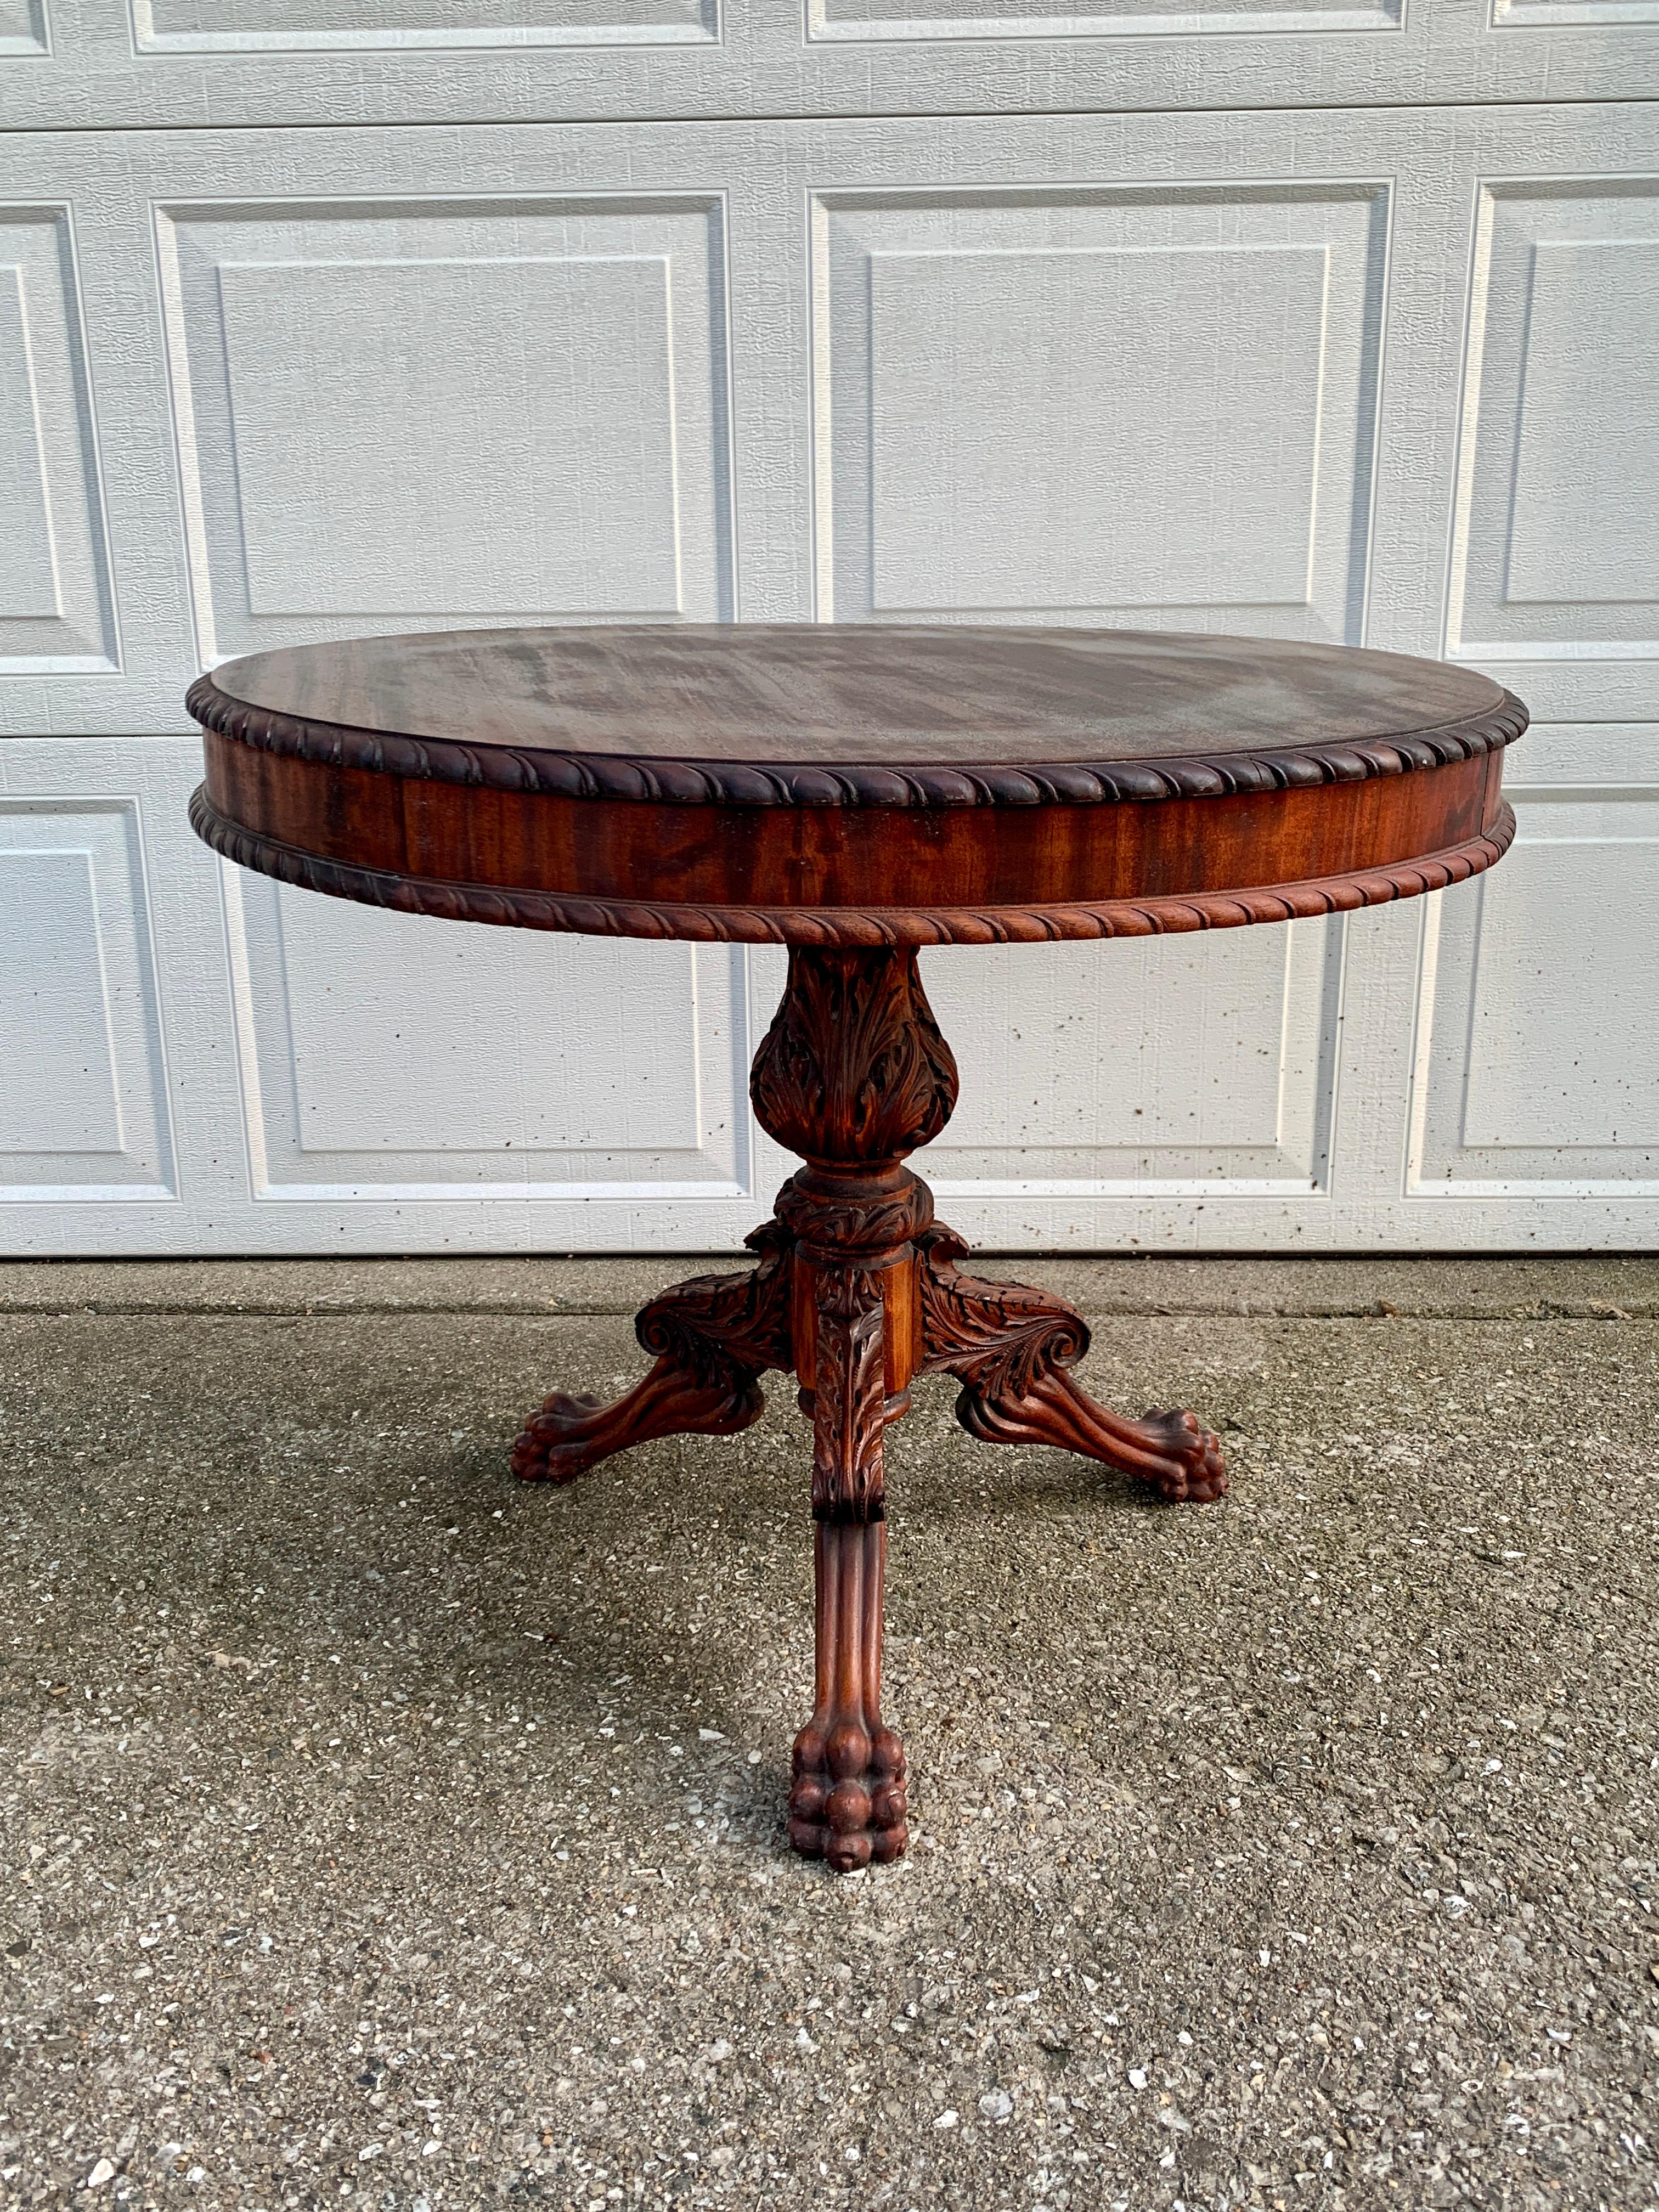 Antique American Empire Mahogany Paw Foot Pedestal Side Table, Late 19th Century For Sale 6